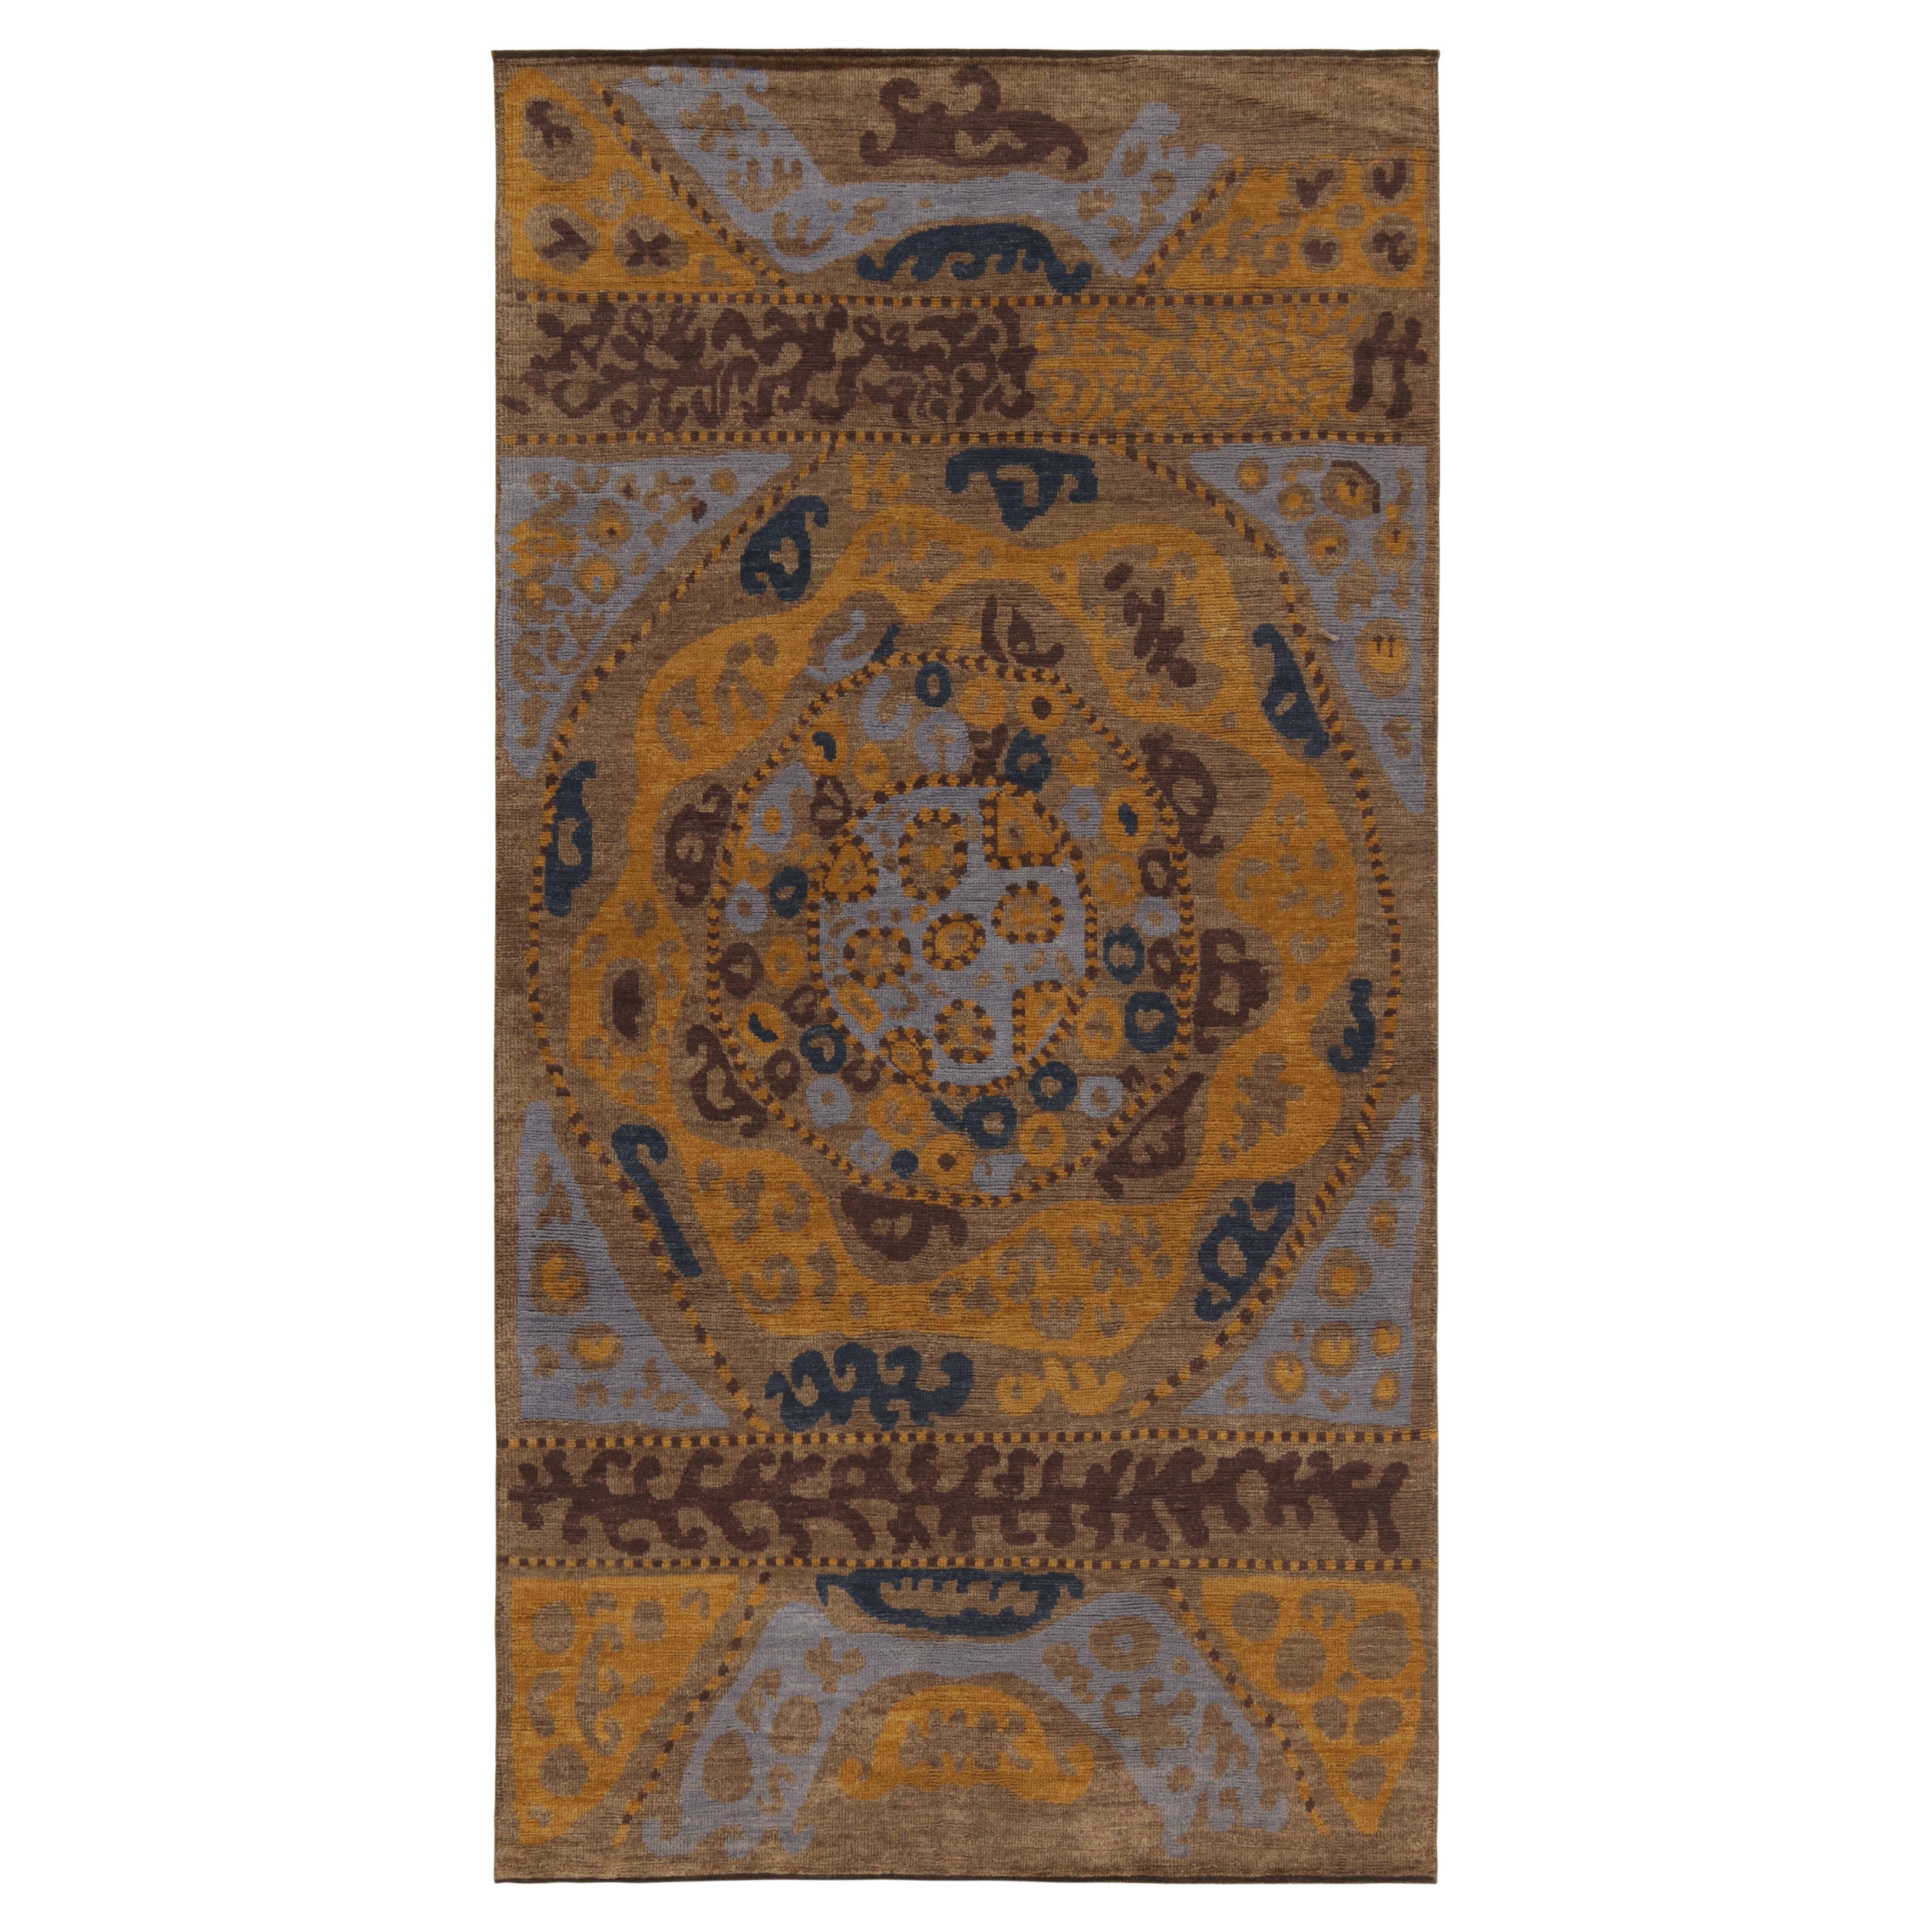 Rug & Kilim’s Tribal style rug in Beige-Brown, Gold and Blue Patterns For Sale